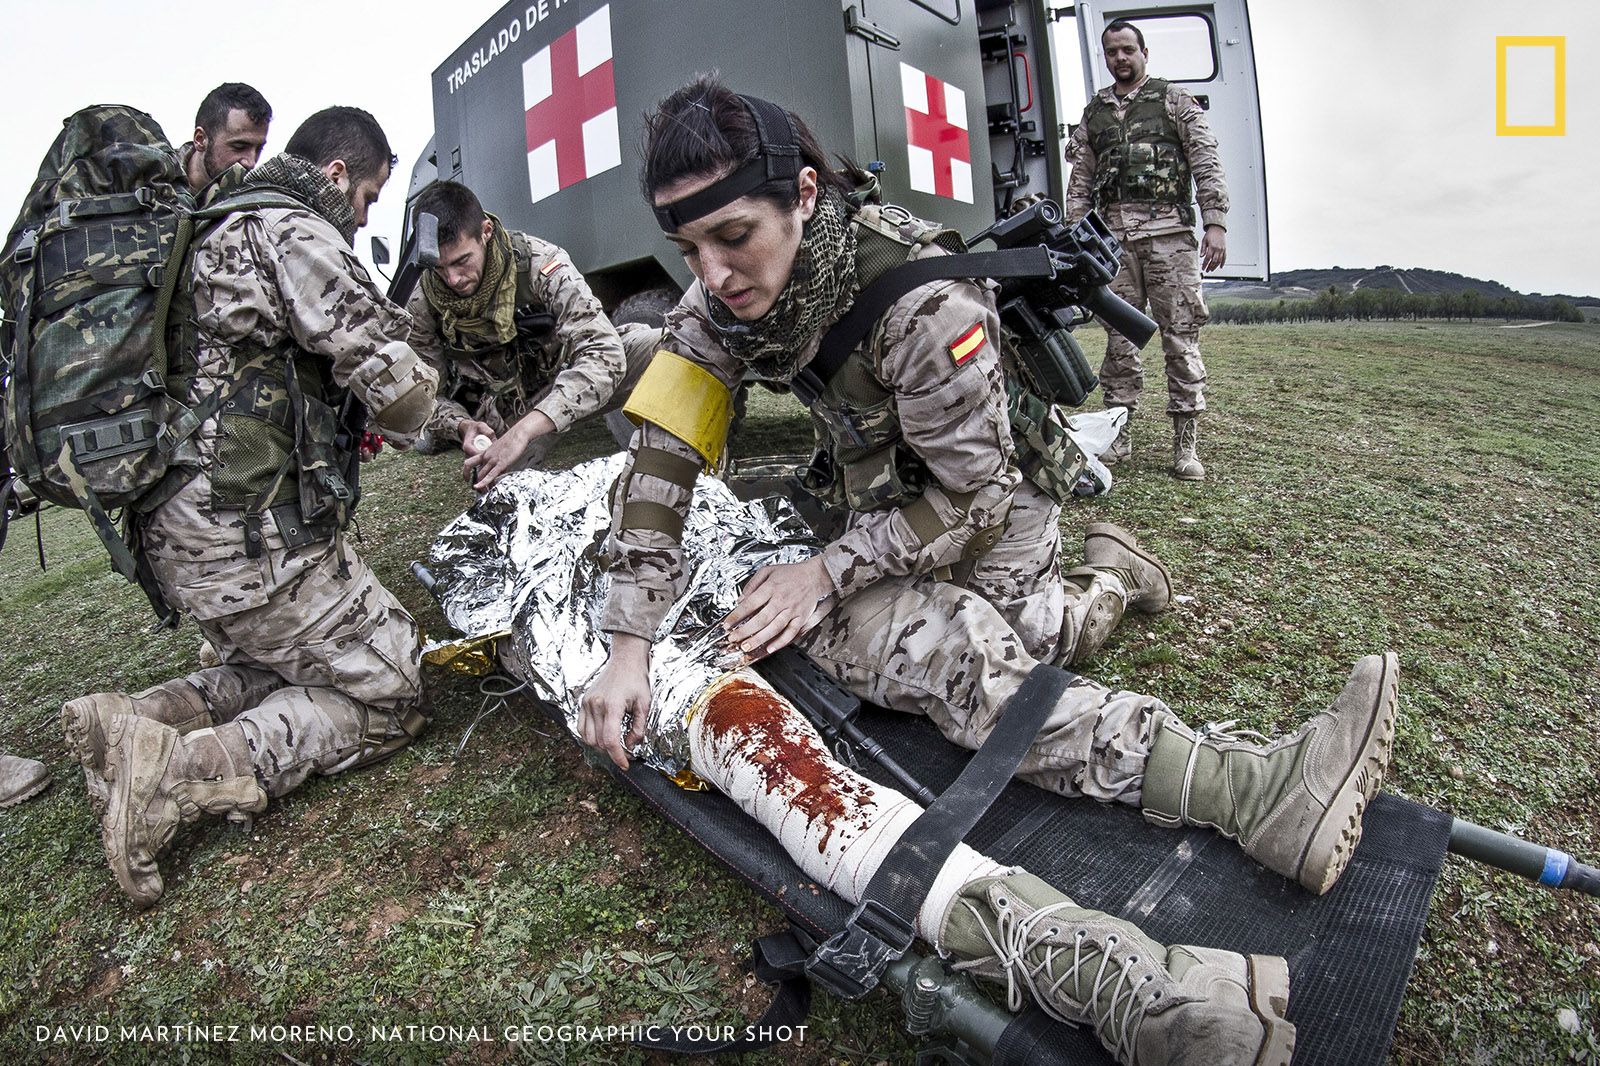 Transfer and fast evacuation of a wounded in the Spanish army. Image by David Martinez Moreno.